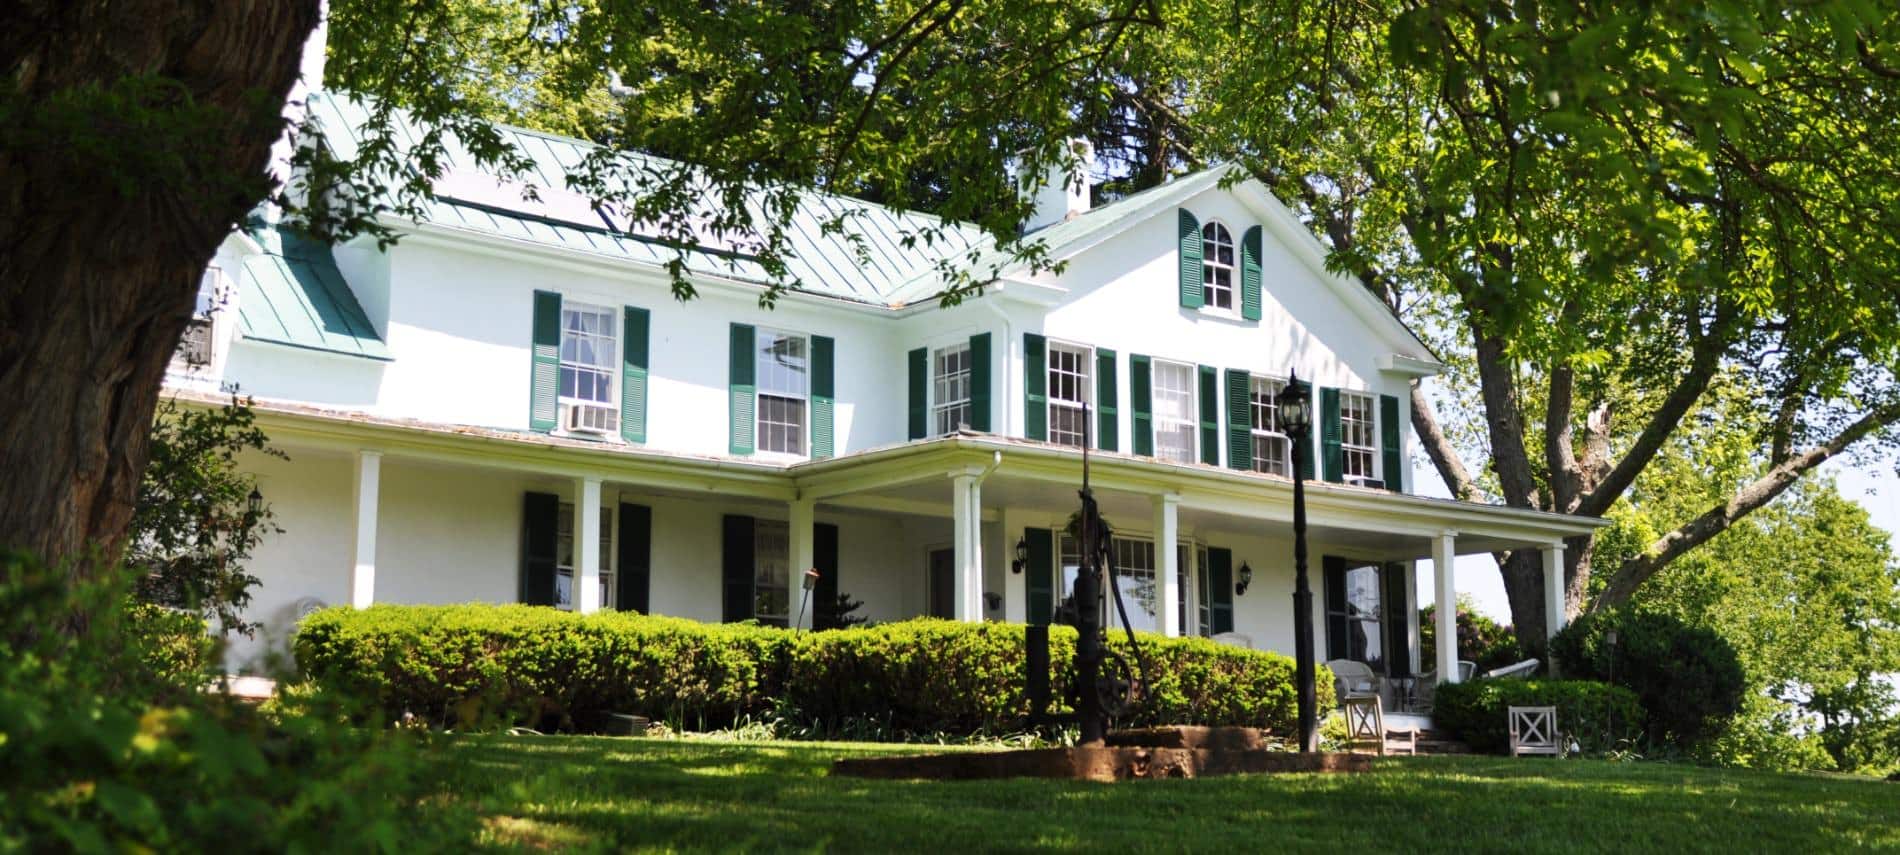 Exterior view of property painted white with dark shutters surrounded by a large green lawn, shrubs, and trees